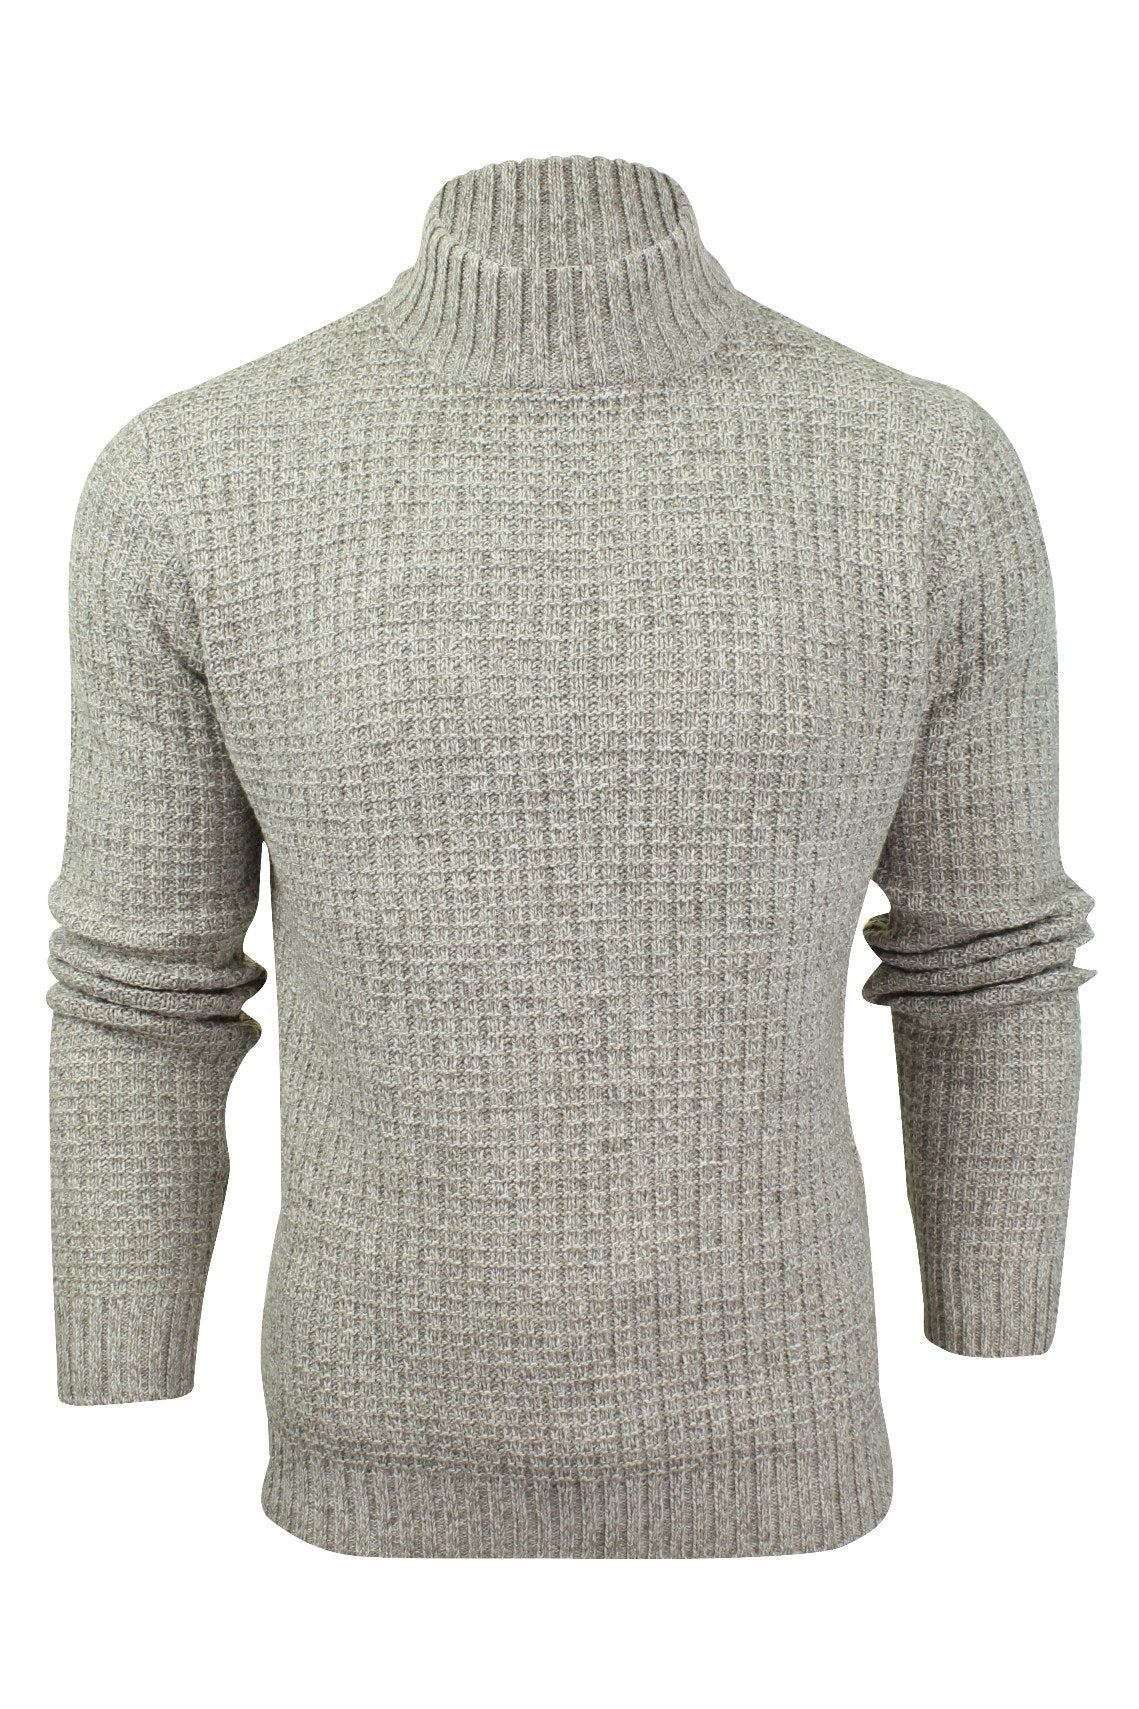 Xact Mens Textured Knit Turtle Neck Jumper-2